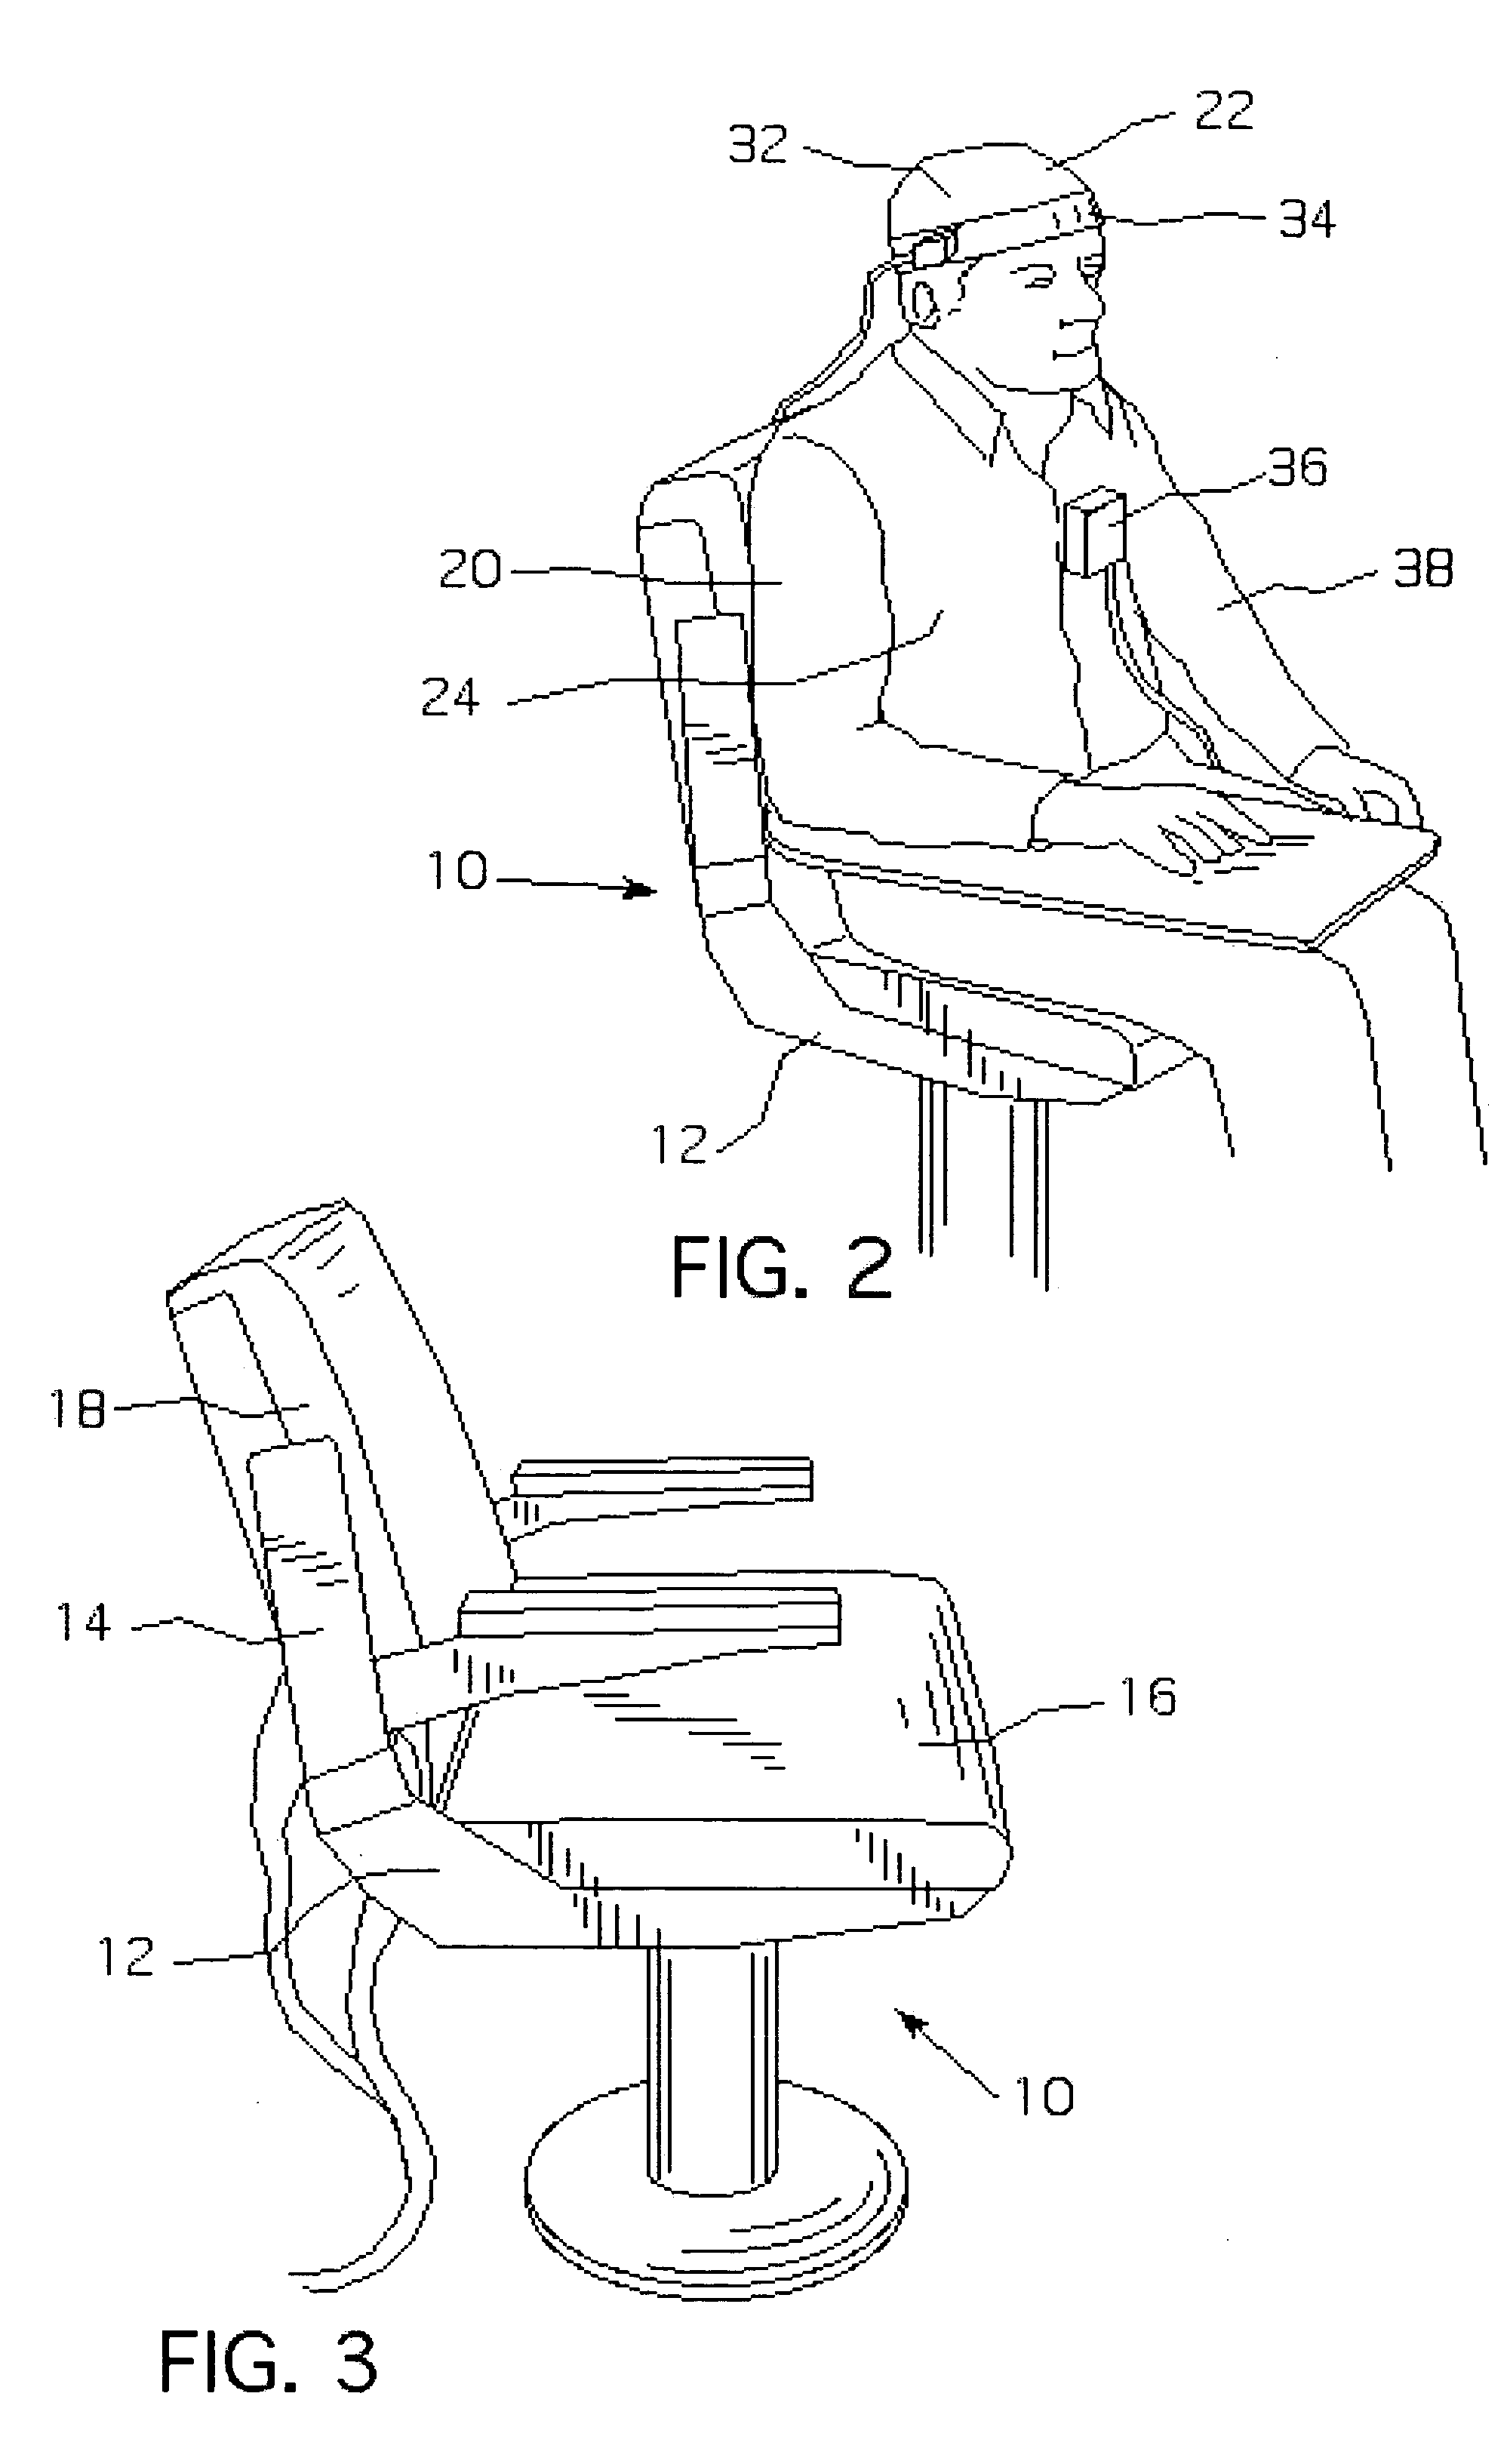 Apparatus and method for postural assessment while performing cognitive tasks